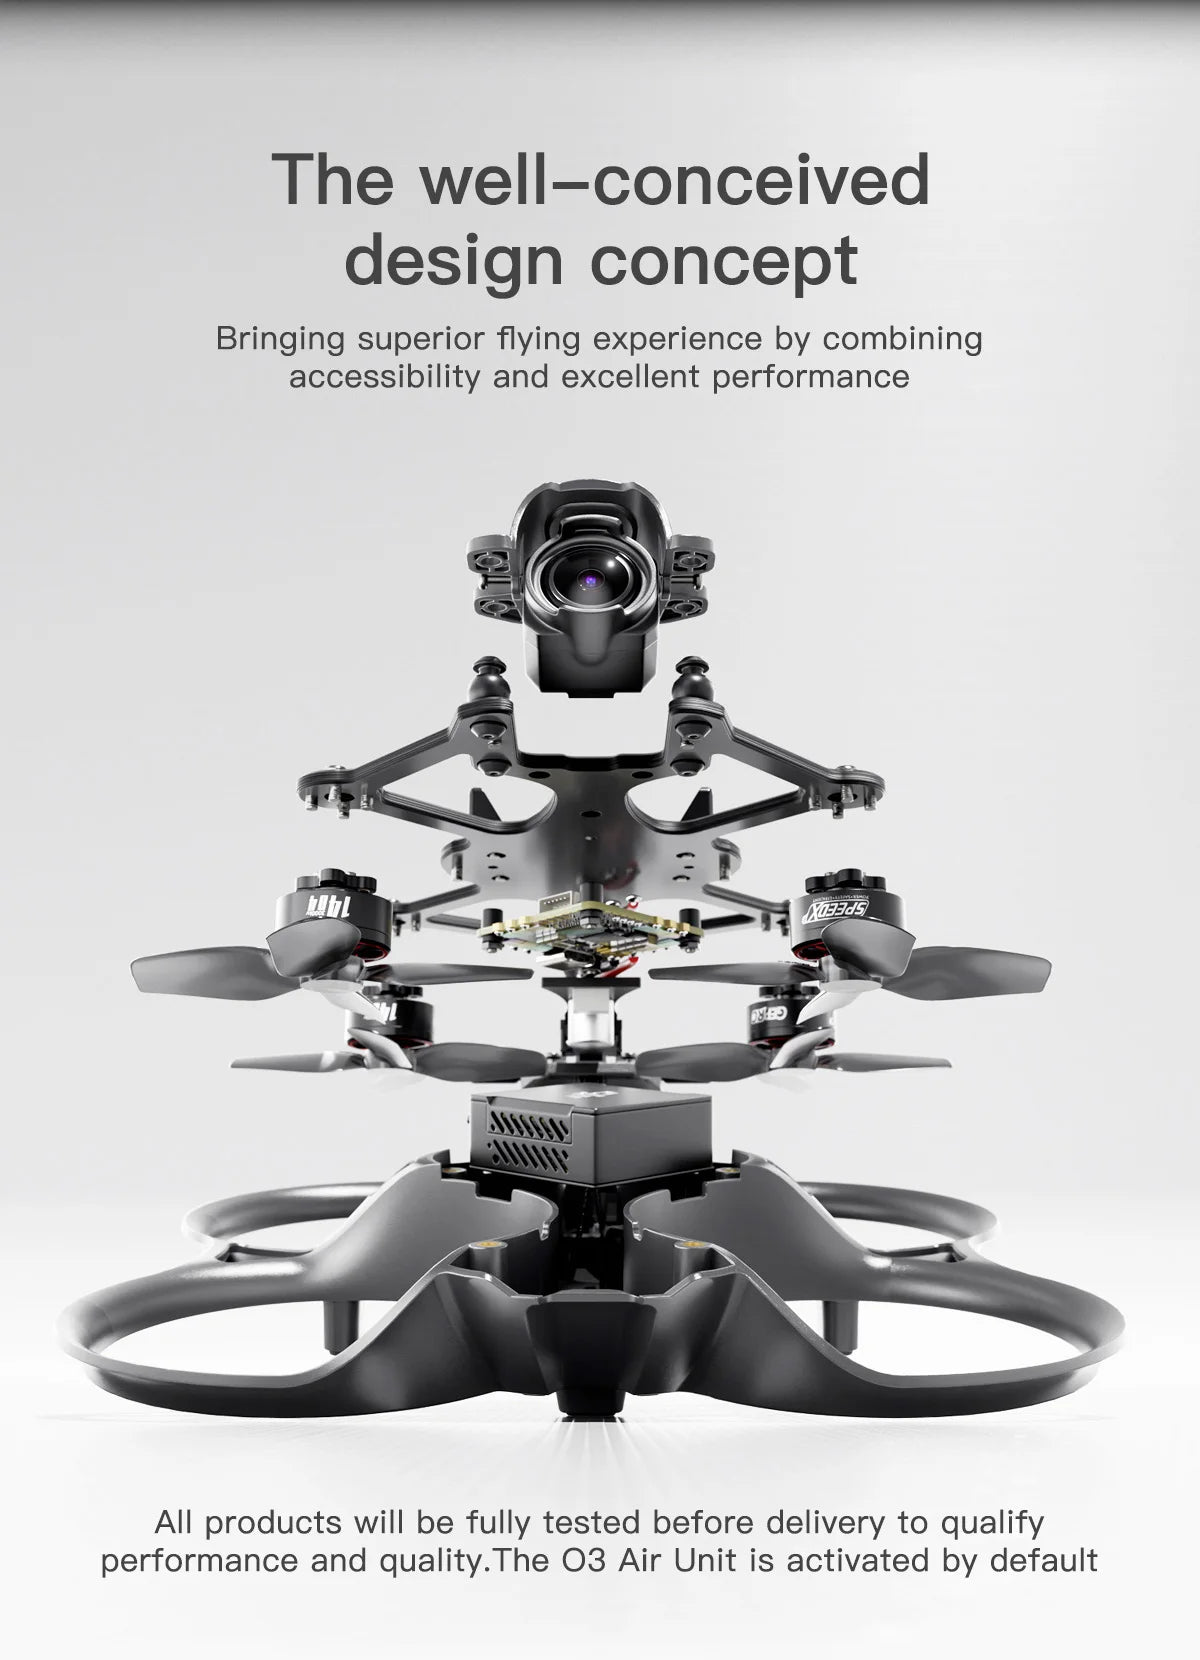 GEPRC Cinebot25 S HD Wasp FPV Drone, the well-conceived design concept Bringing superior flying experience by combining accessibility and excellent performance 